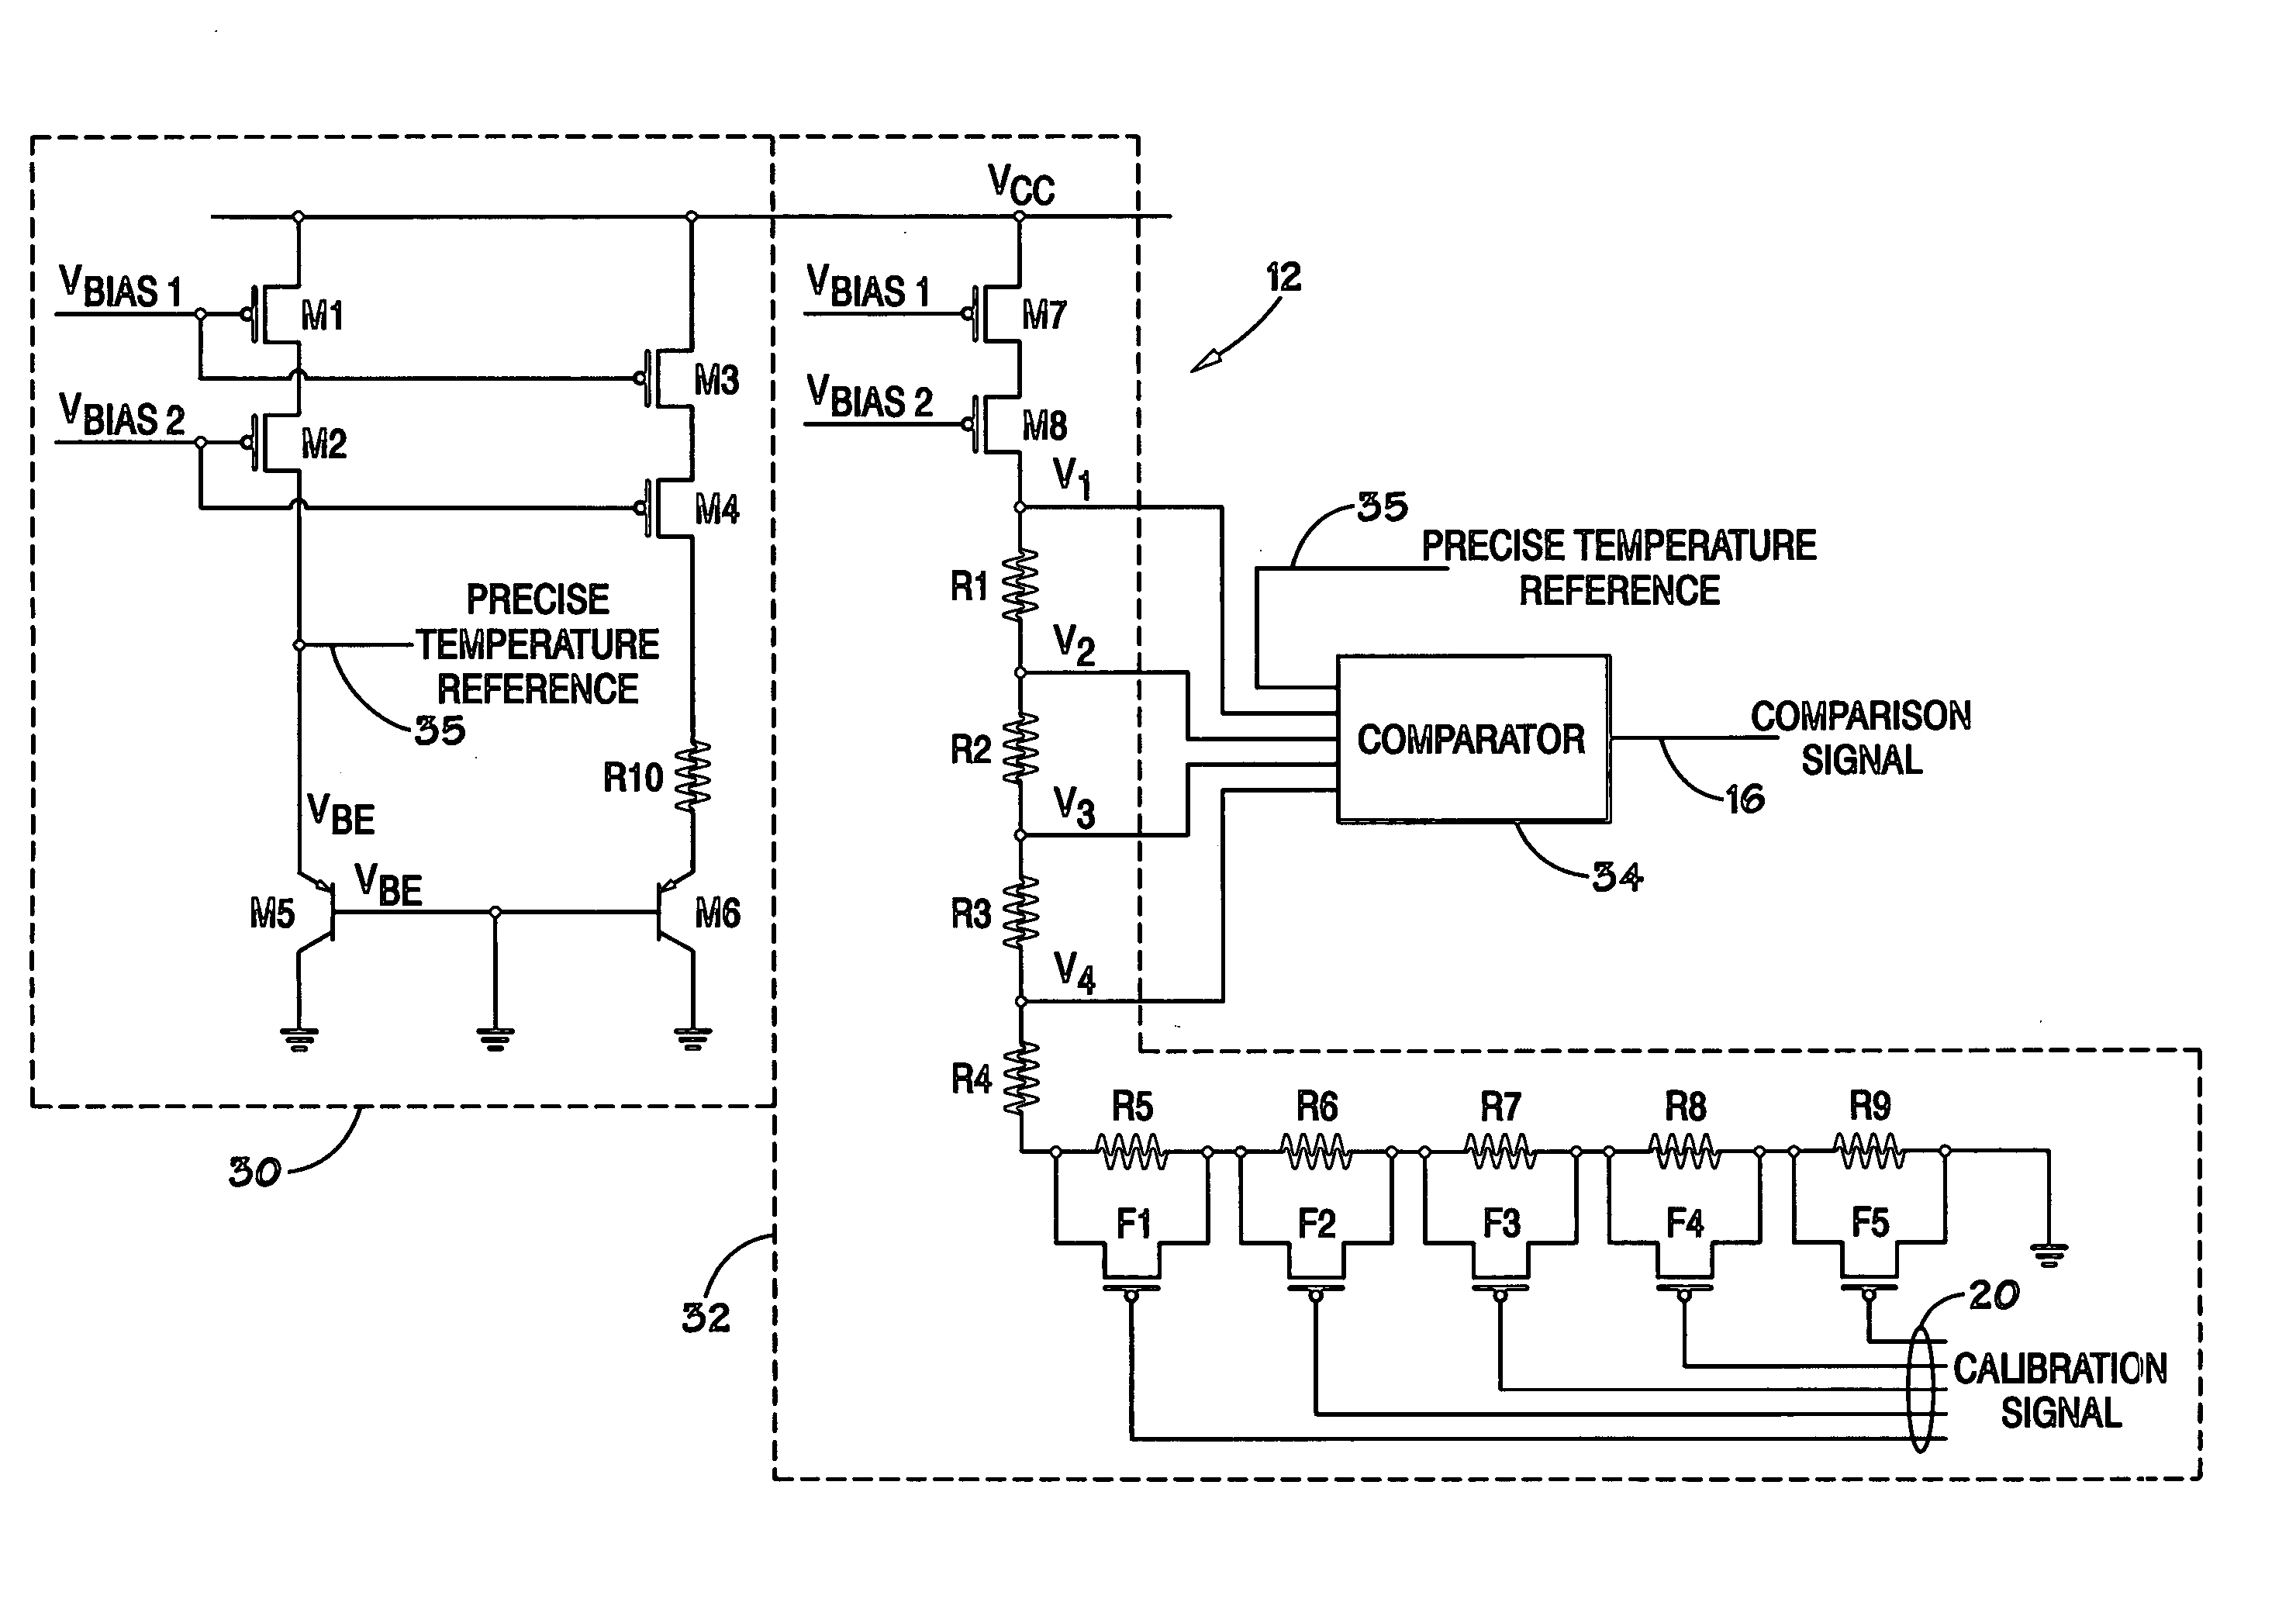 System and method for automatically calibrating a temperature sensor